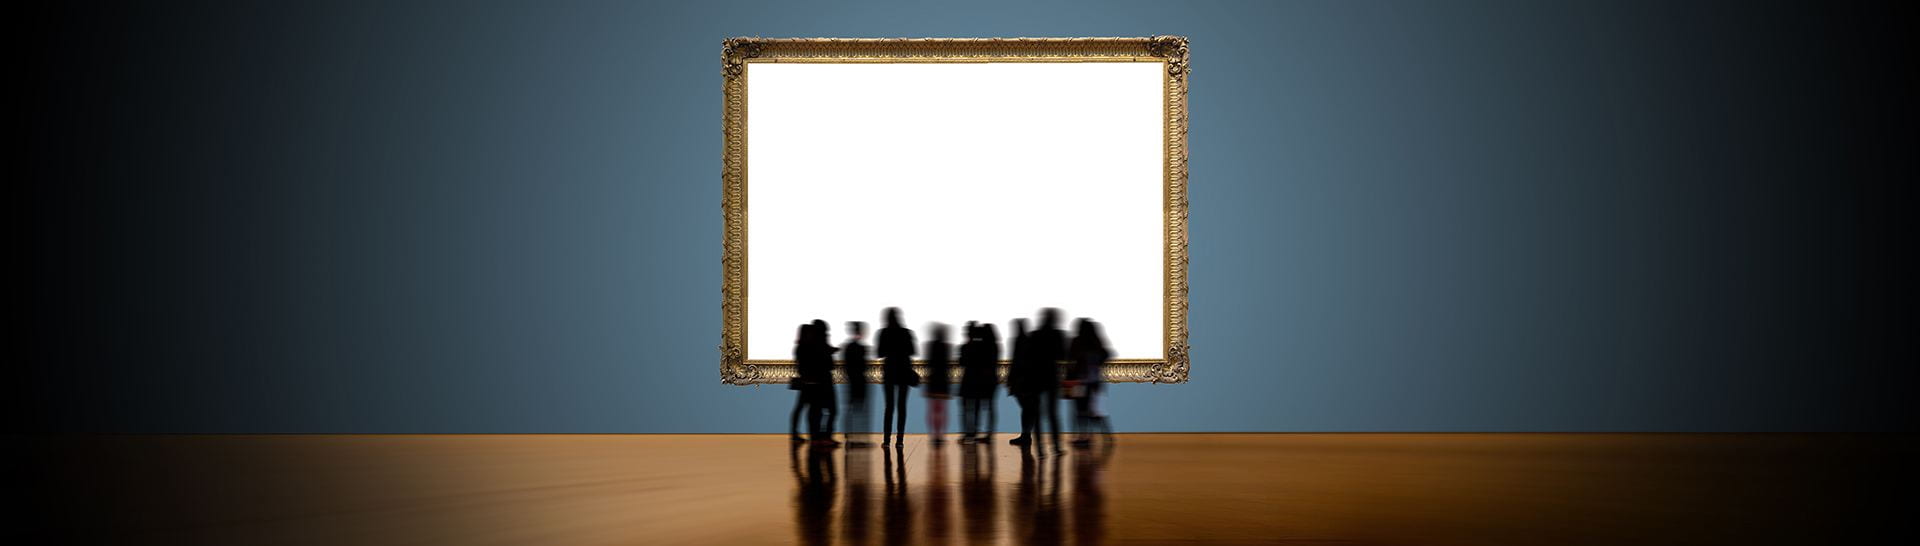 Large blank art canvas being viewed in a gallery setting by group of silhouetted people